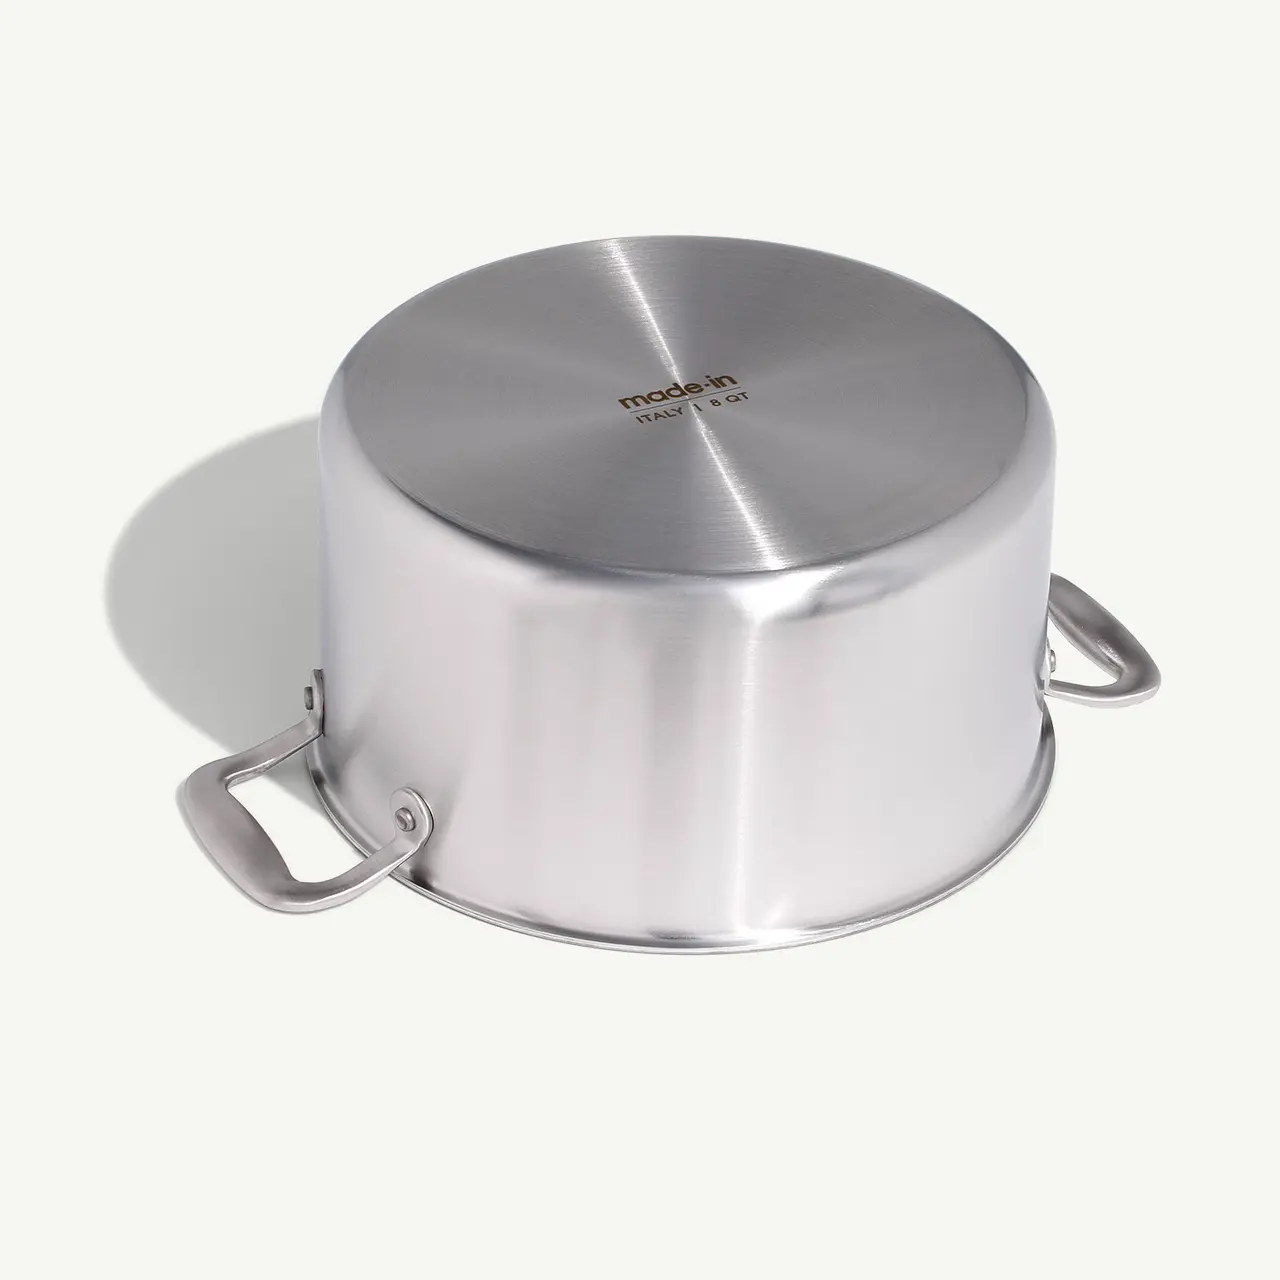 A stainless steel pot with two handles and a closed lid, displayed on a light background.